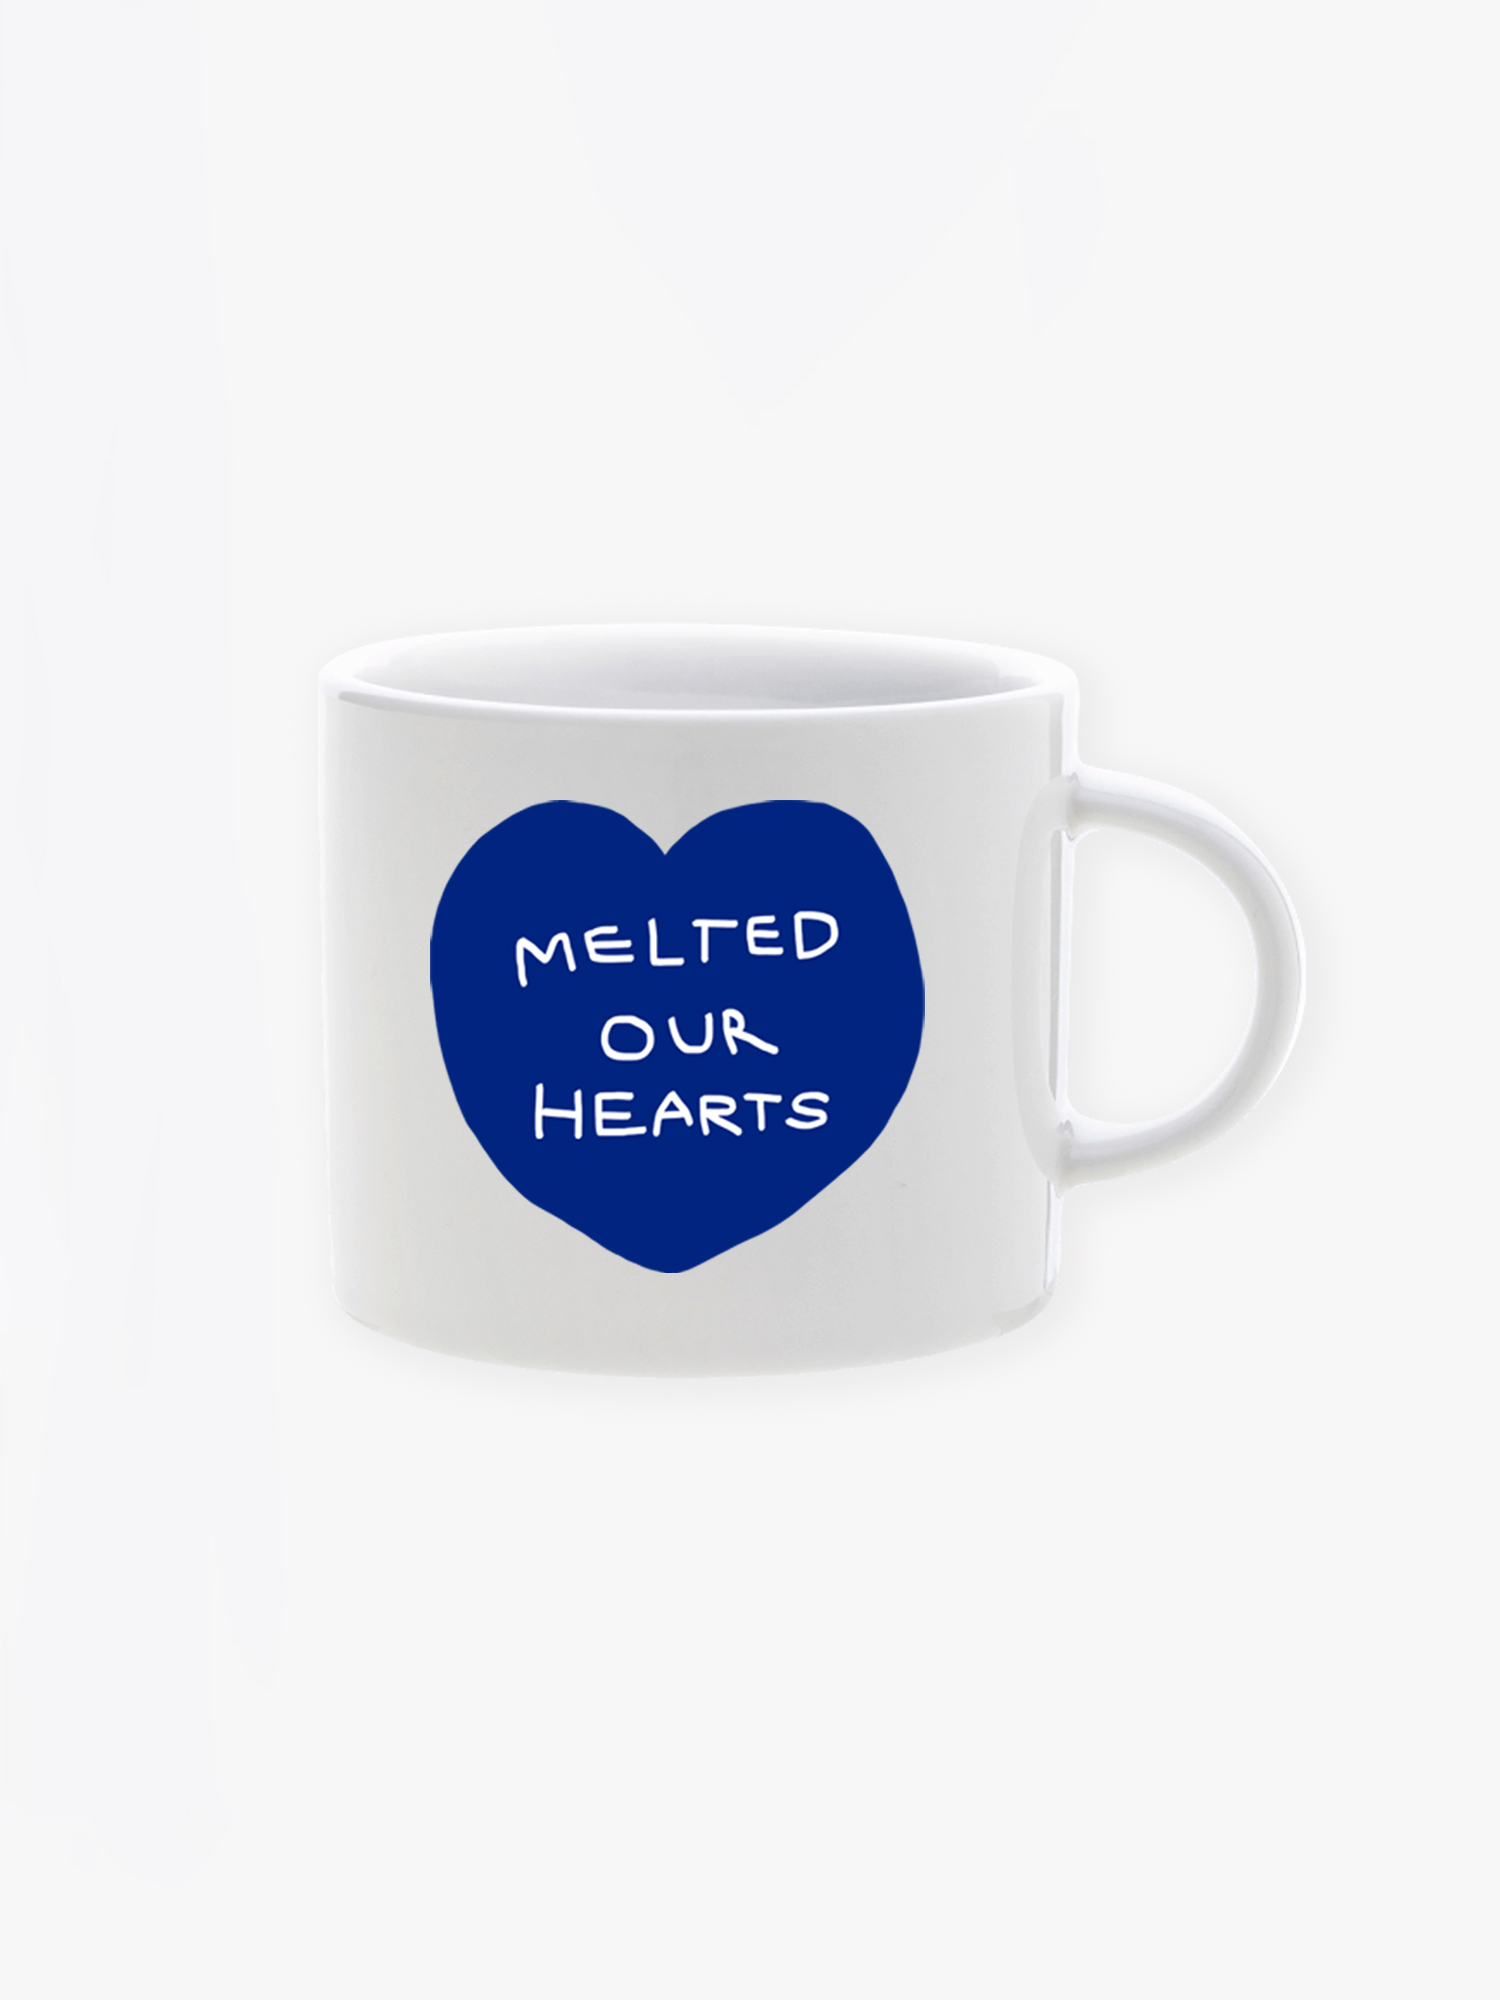 Melted our hearts Mug (Classic Blue)